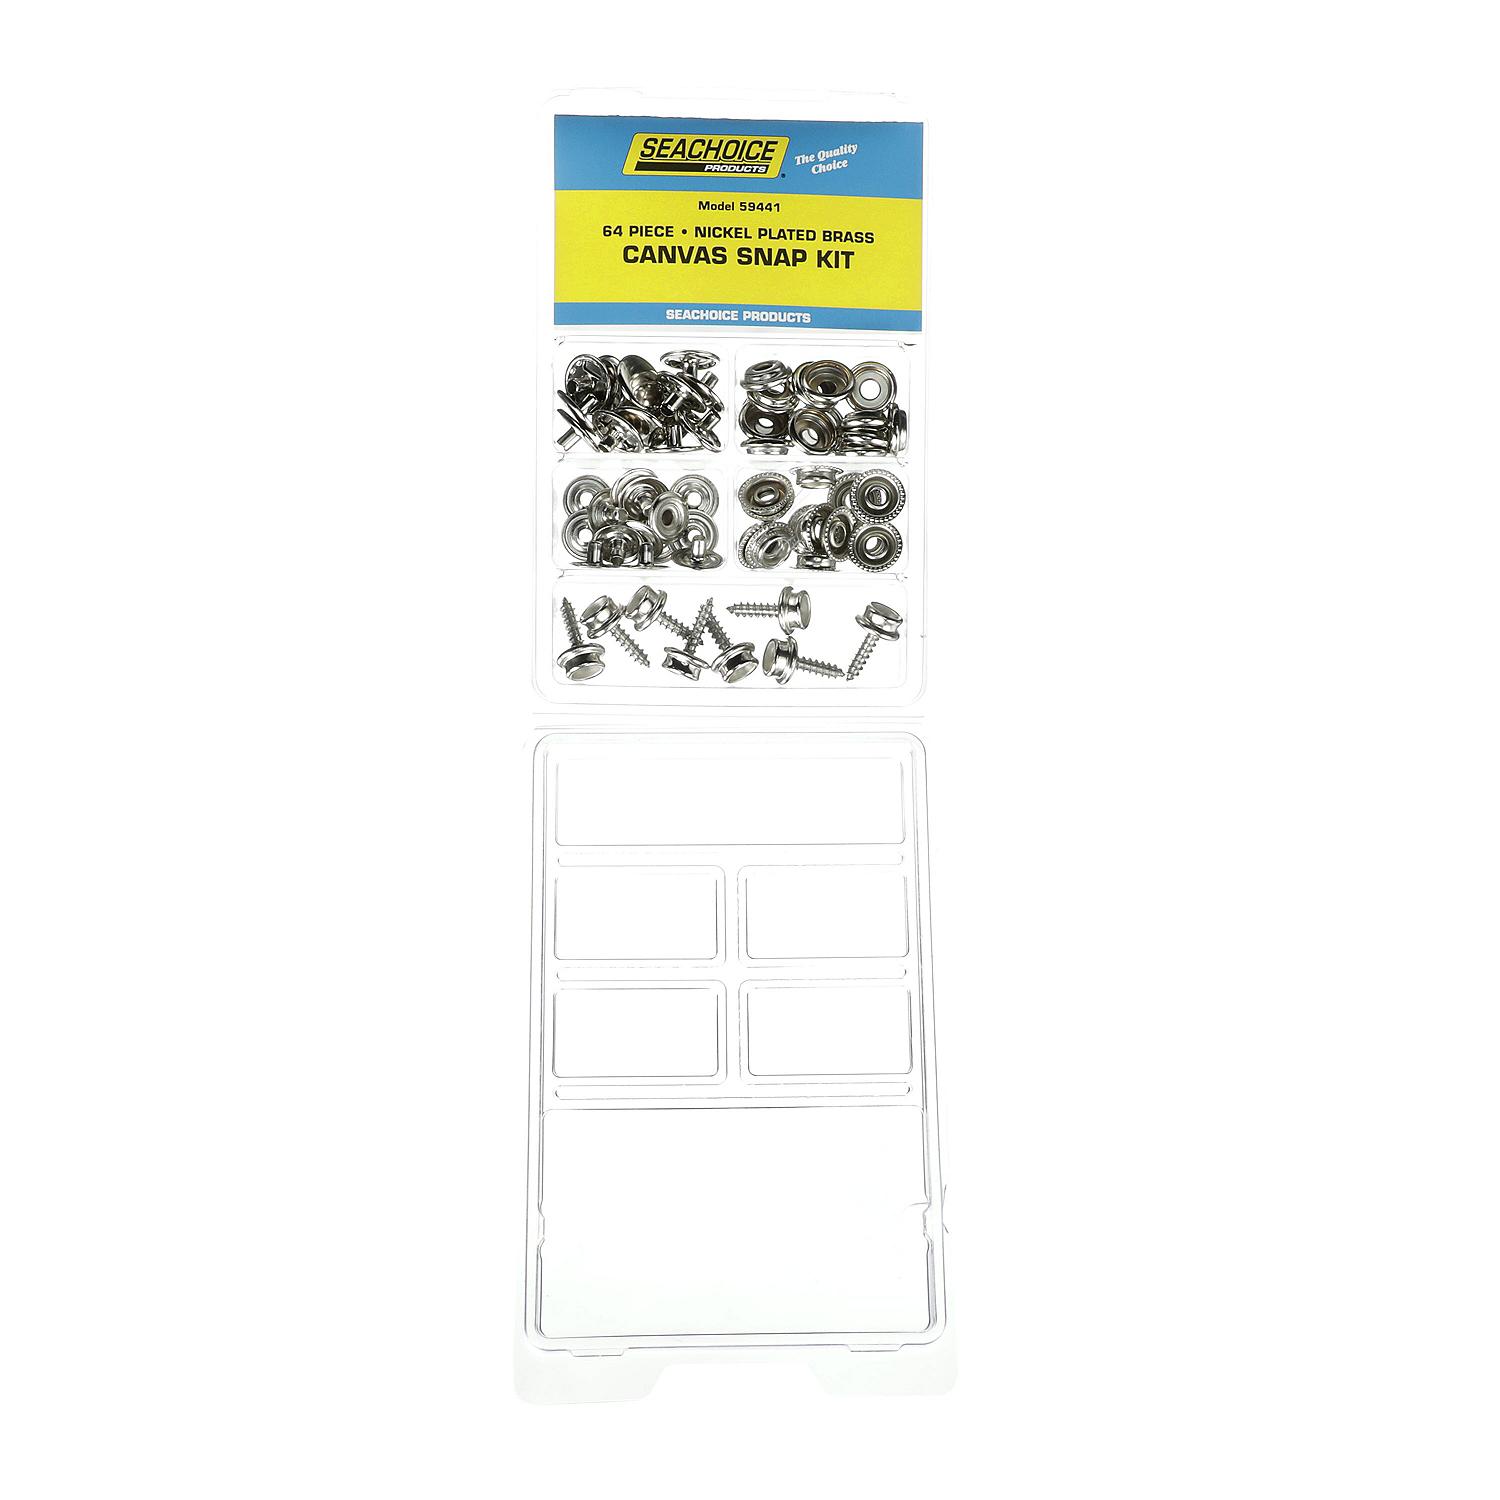 Seachoice 59439 Nickel Plated Brass Canvas 49 Piece Snap Kit with Tool 